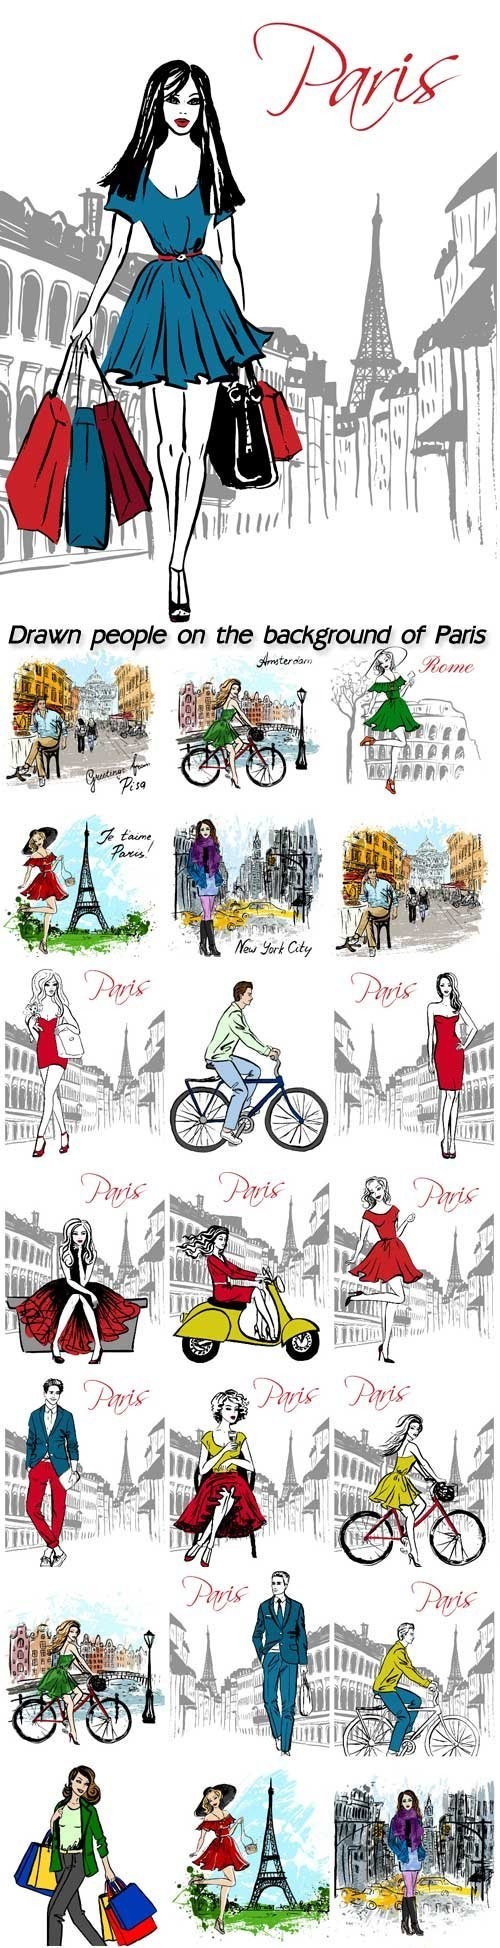 Drawn people on the background of Paris